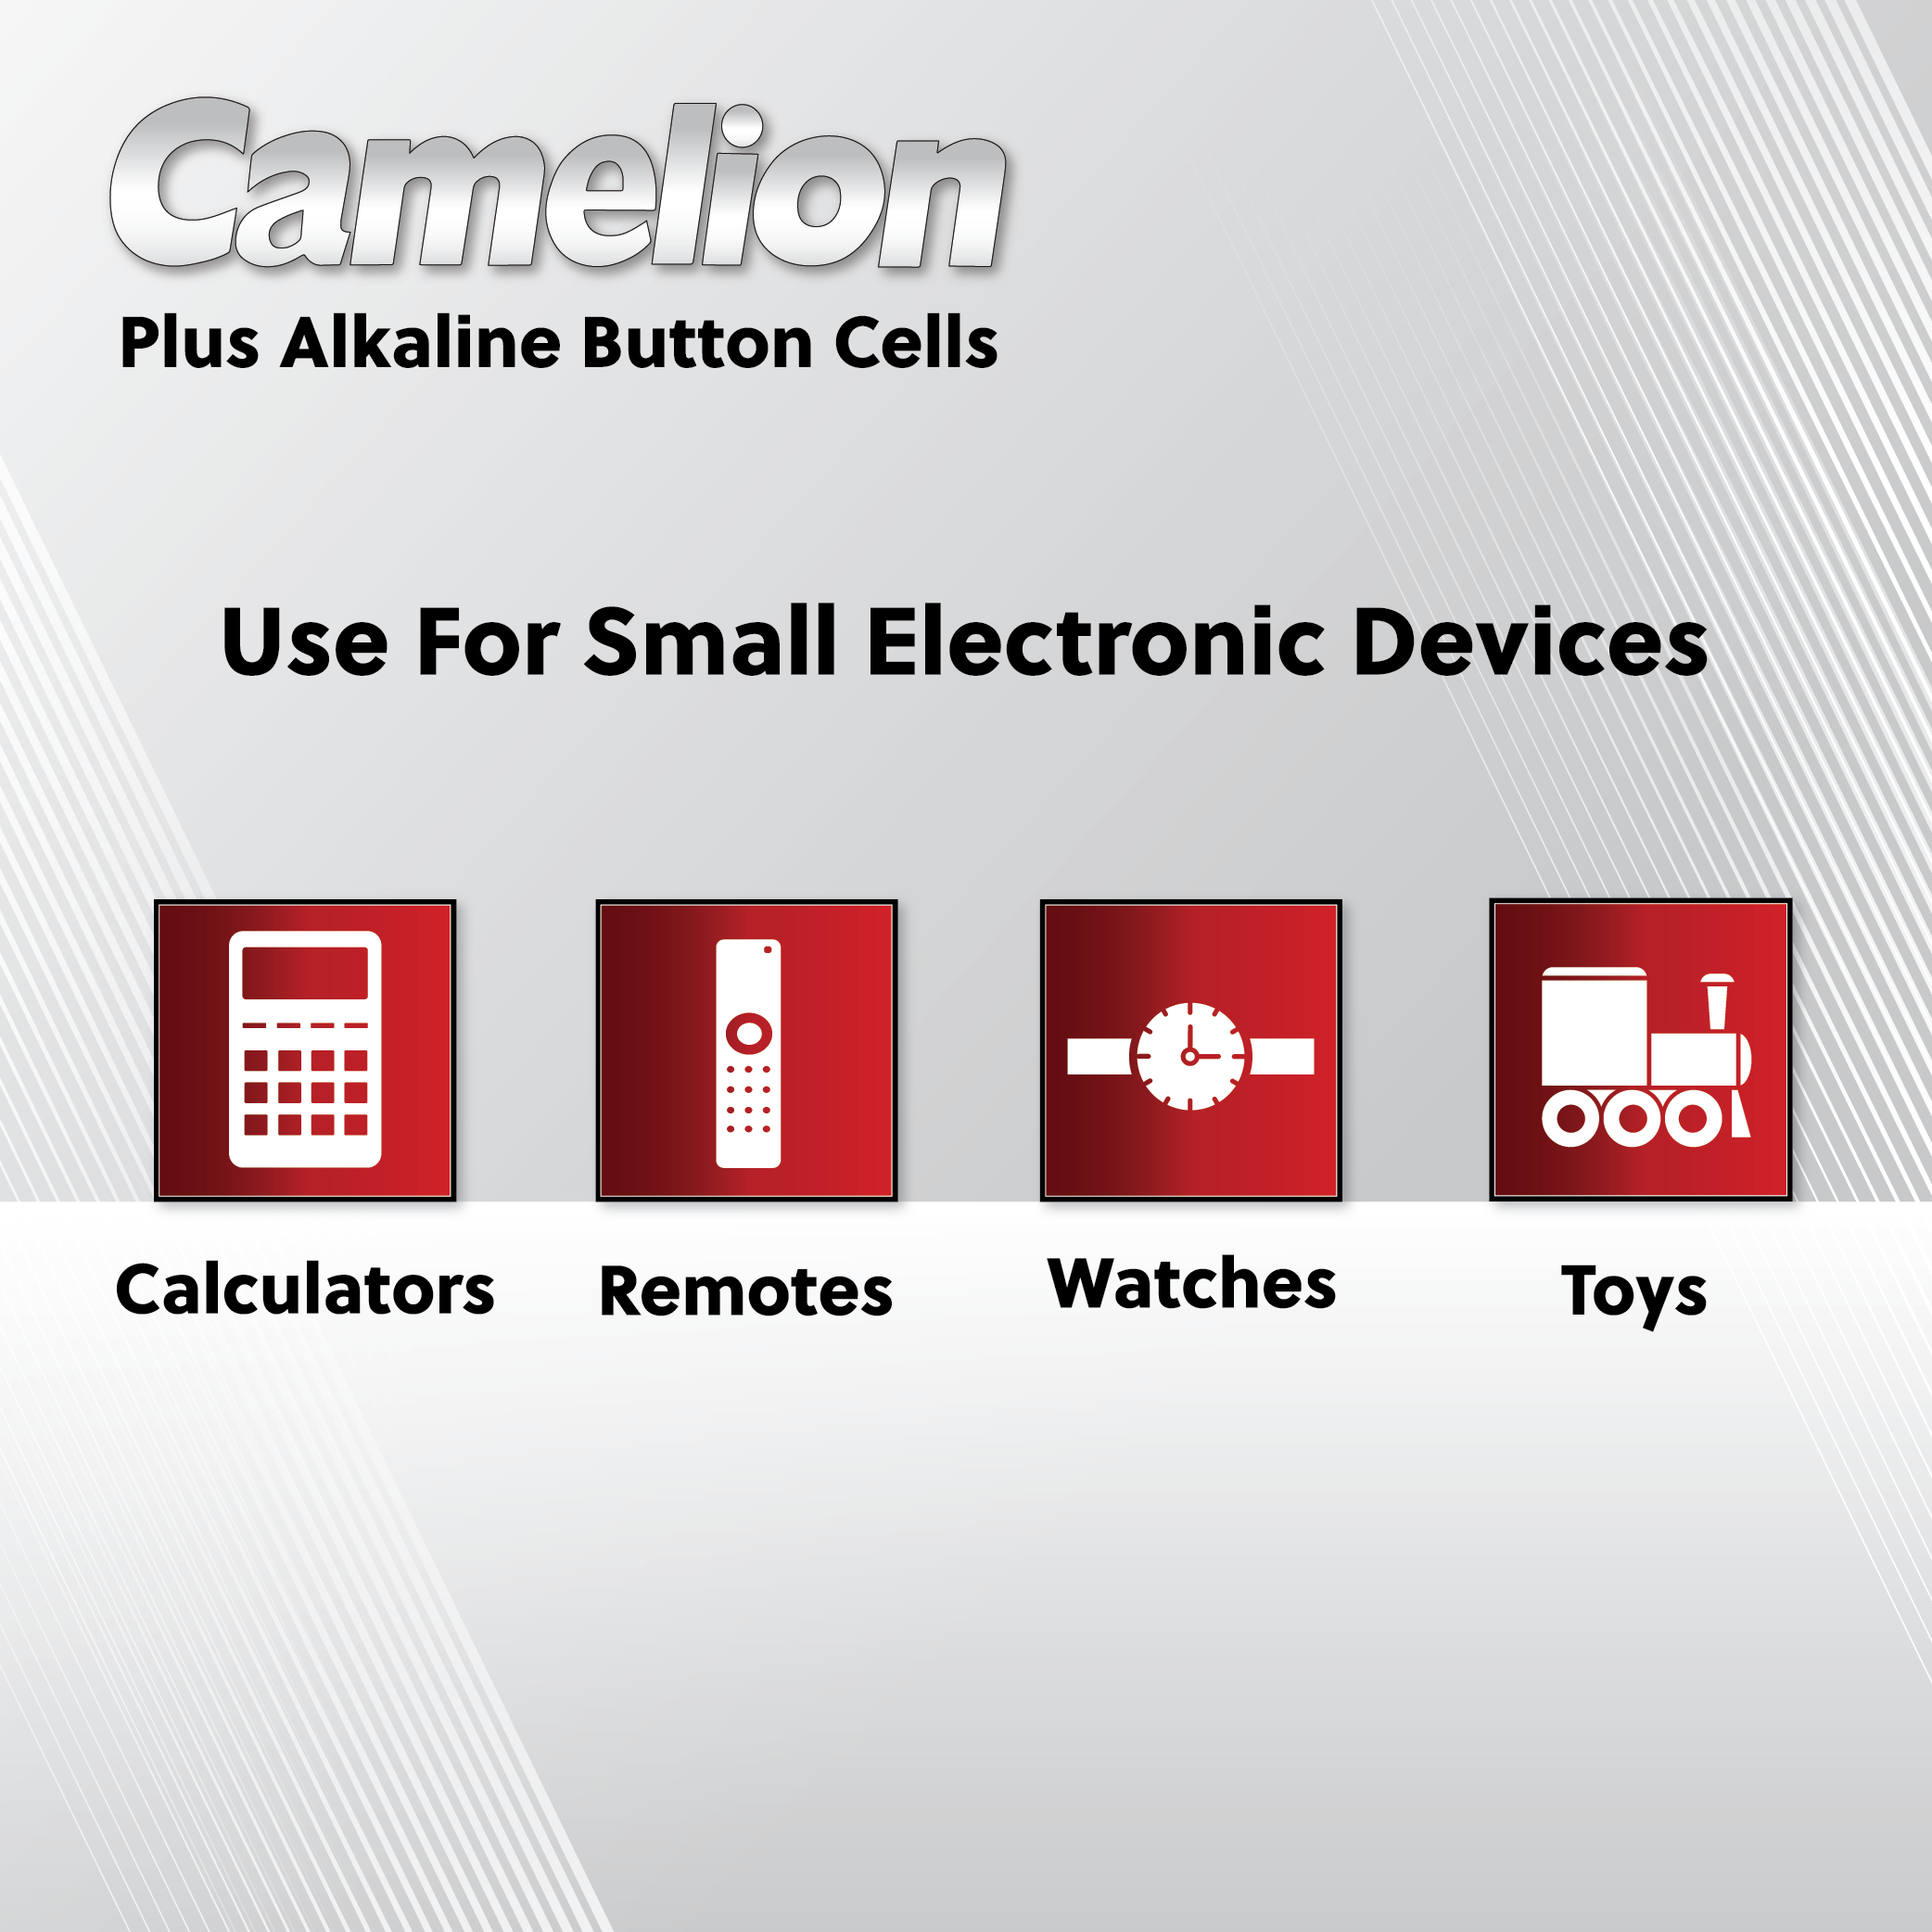 Camelion AG7 / 395 / LR926 1.5V Button Cell Battery (Two Packaging Options)